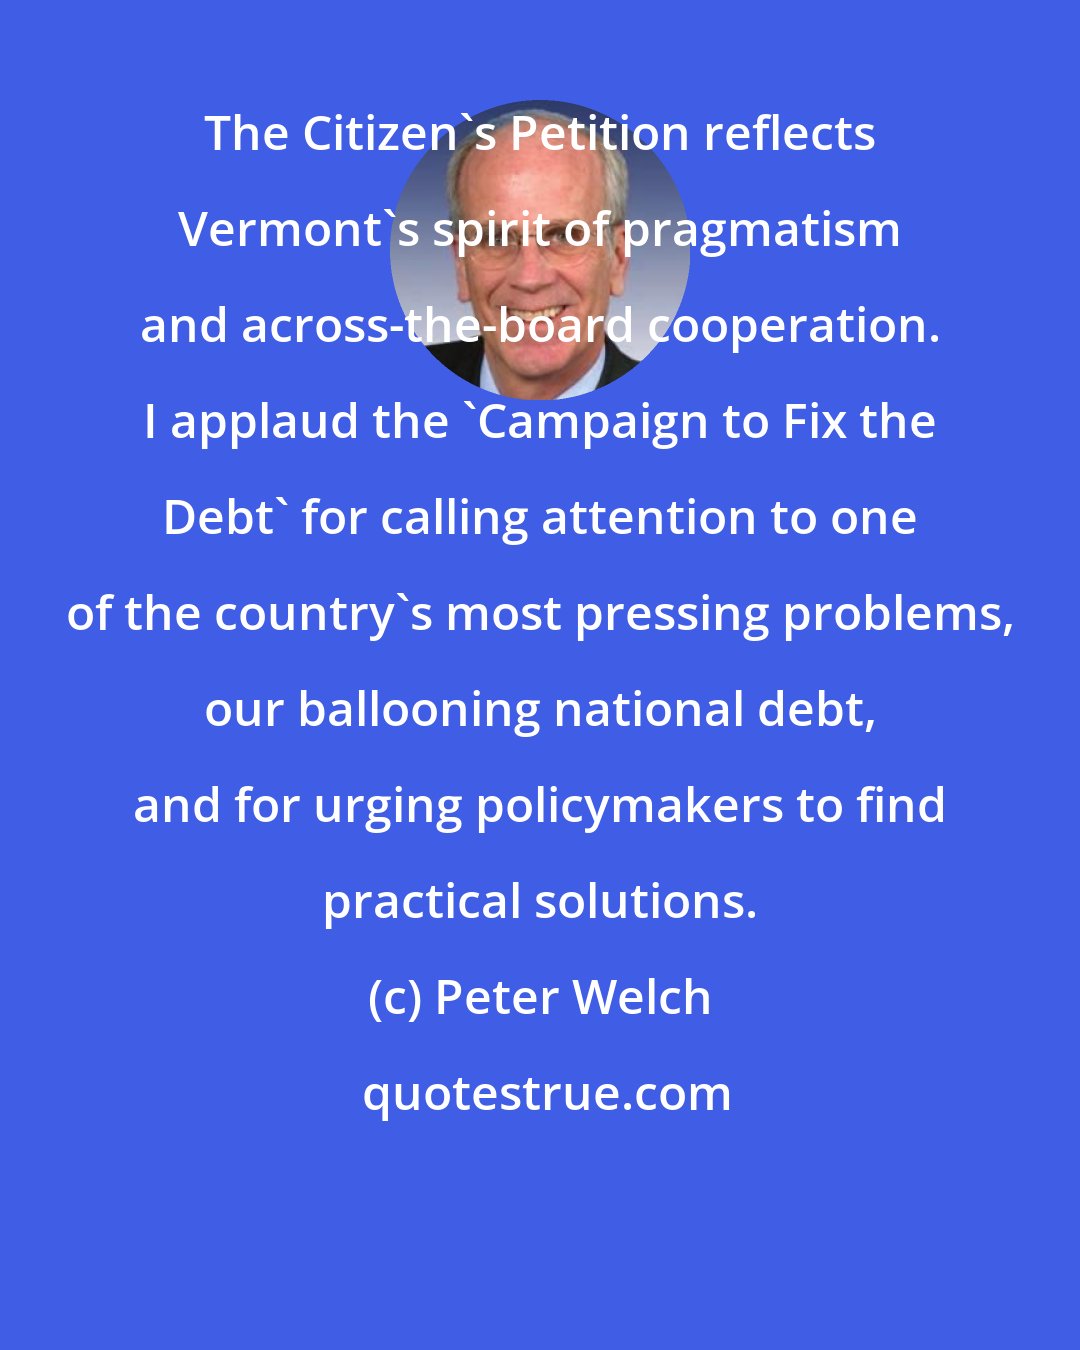 Peter Welch: The Citizen's Petition reflects Vermont's spirit of pragmatism and across-the-board cooperation. I applaud the 'Campaign to Fix the Debt' for calling attention to one of the country's most pressing problems, our ballooning national debt, and for urging policymakers to find practical solutions.